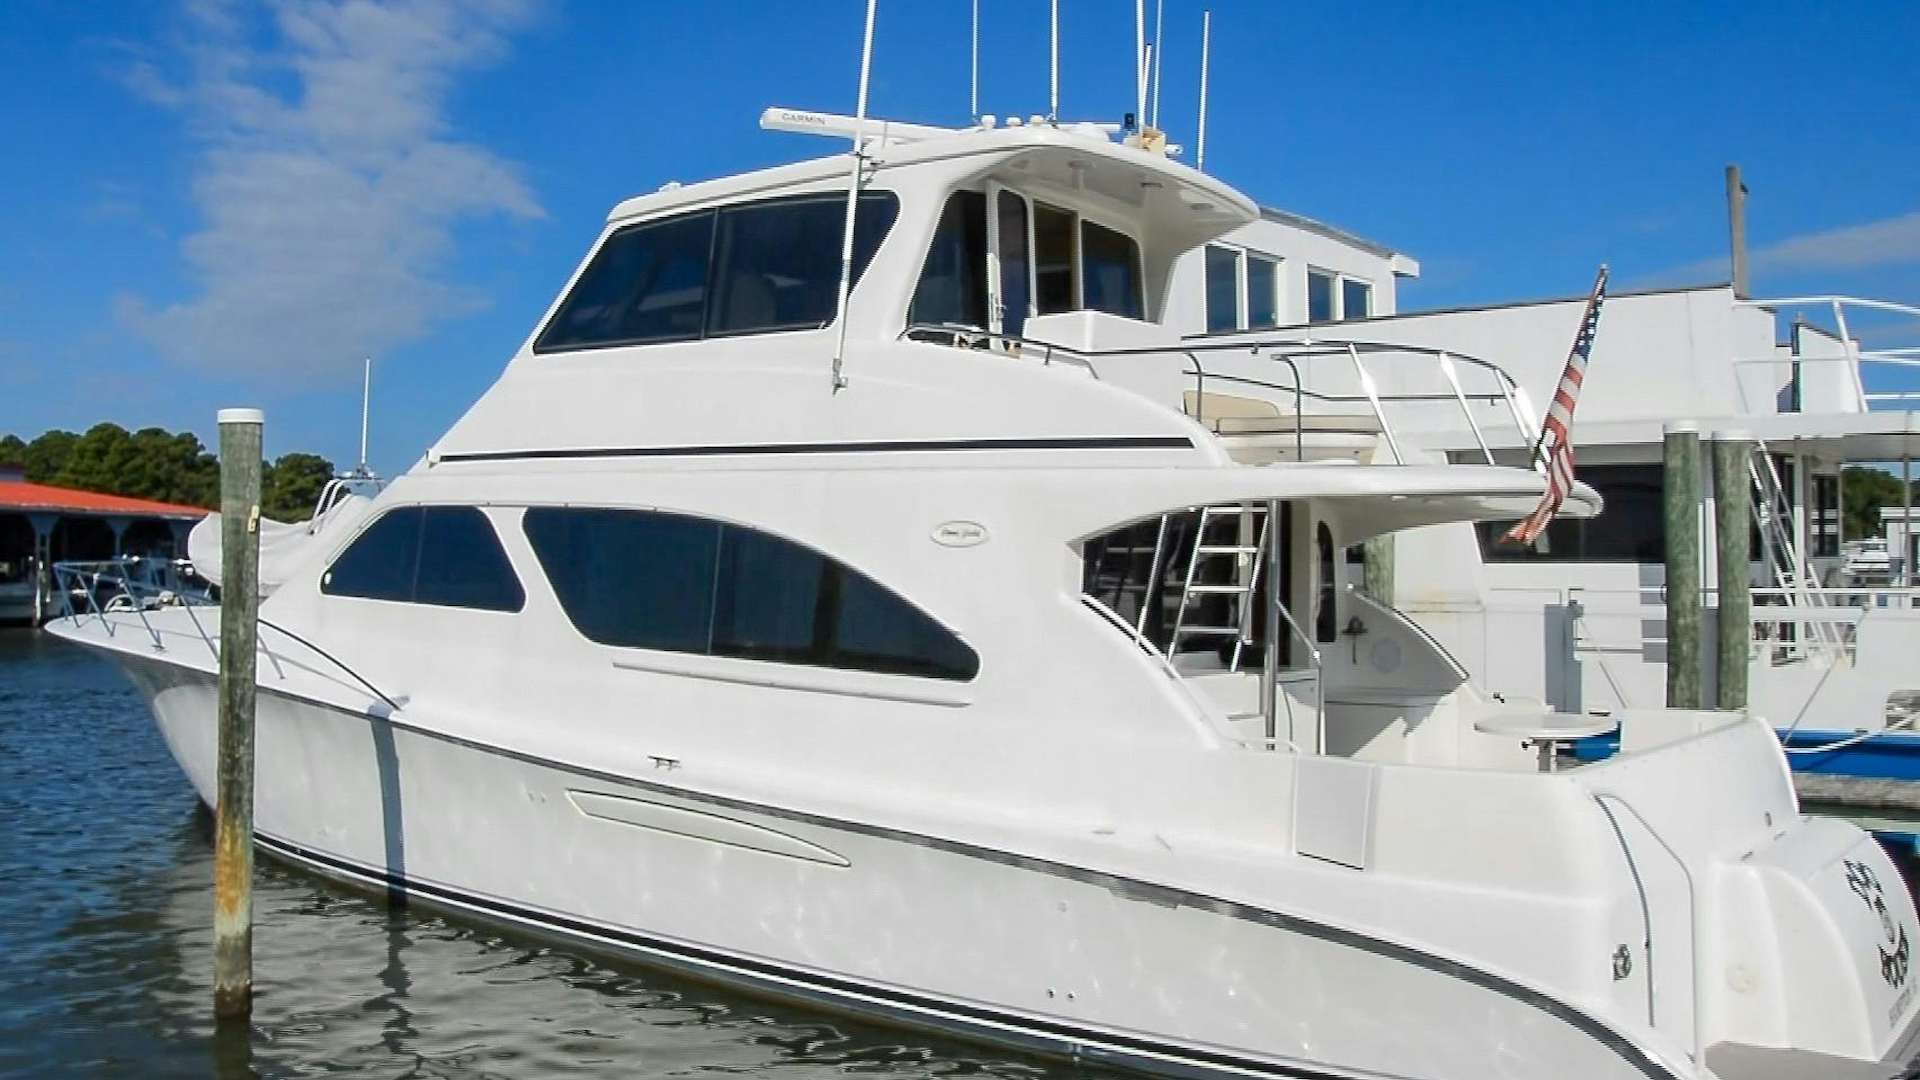 Watch Video for DOG HOUSE Yacht for Sale